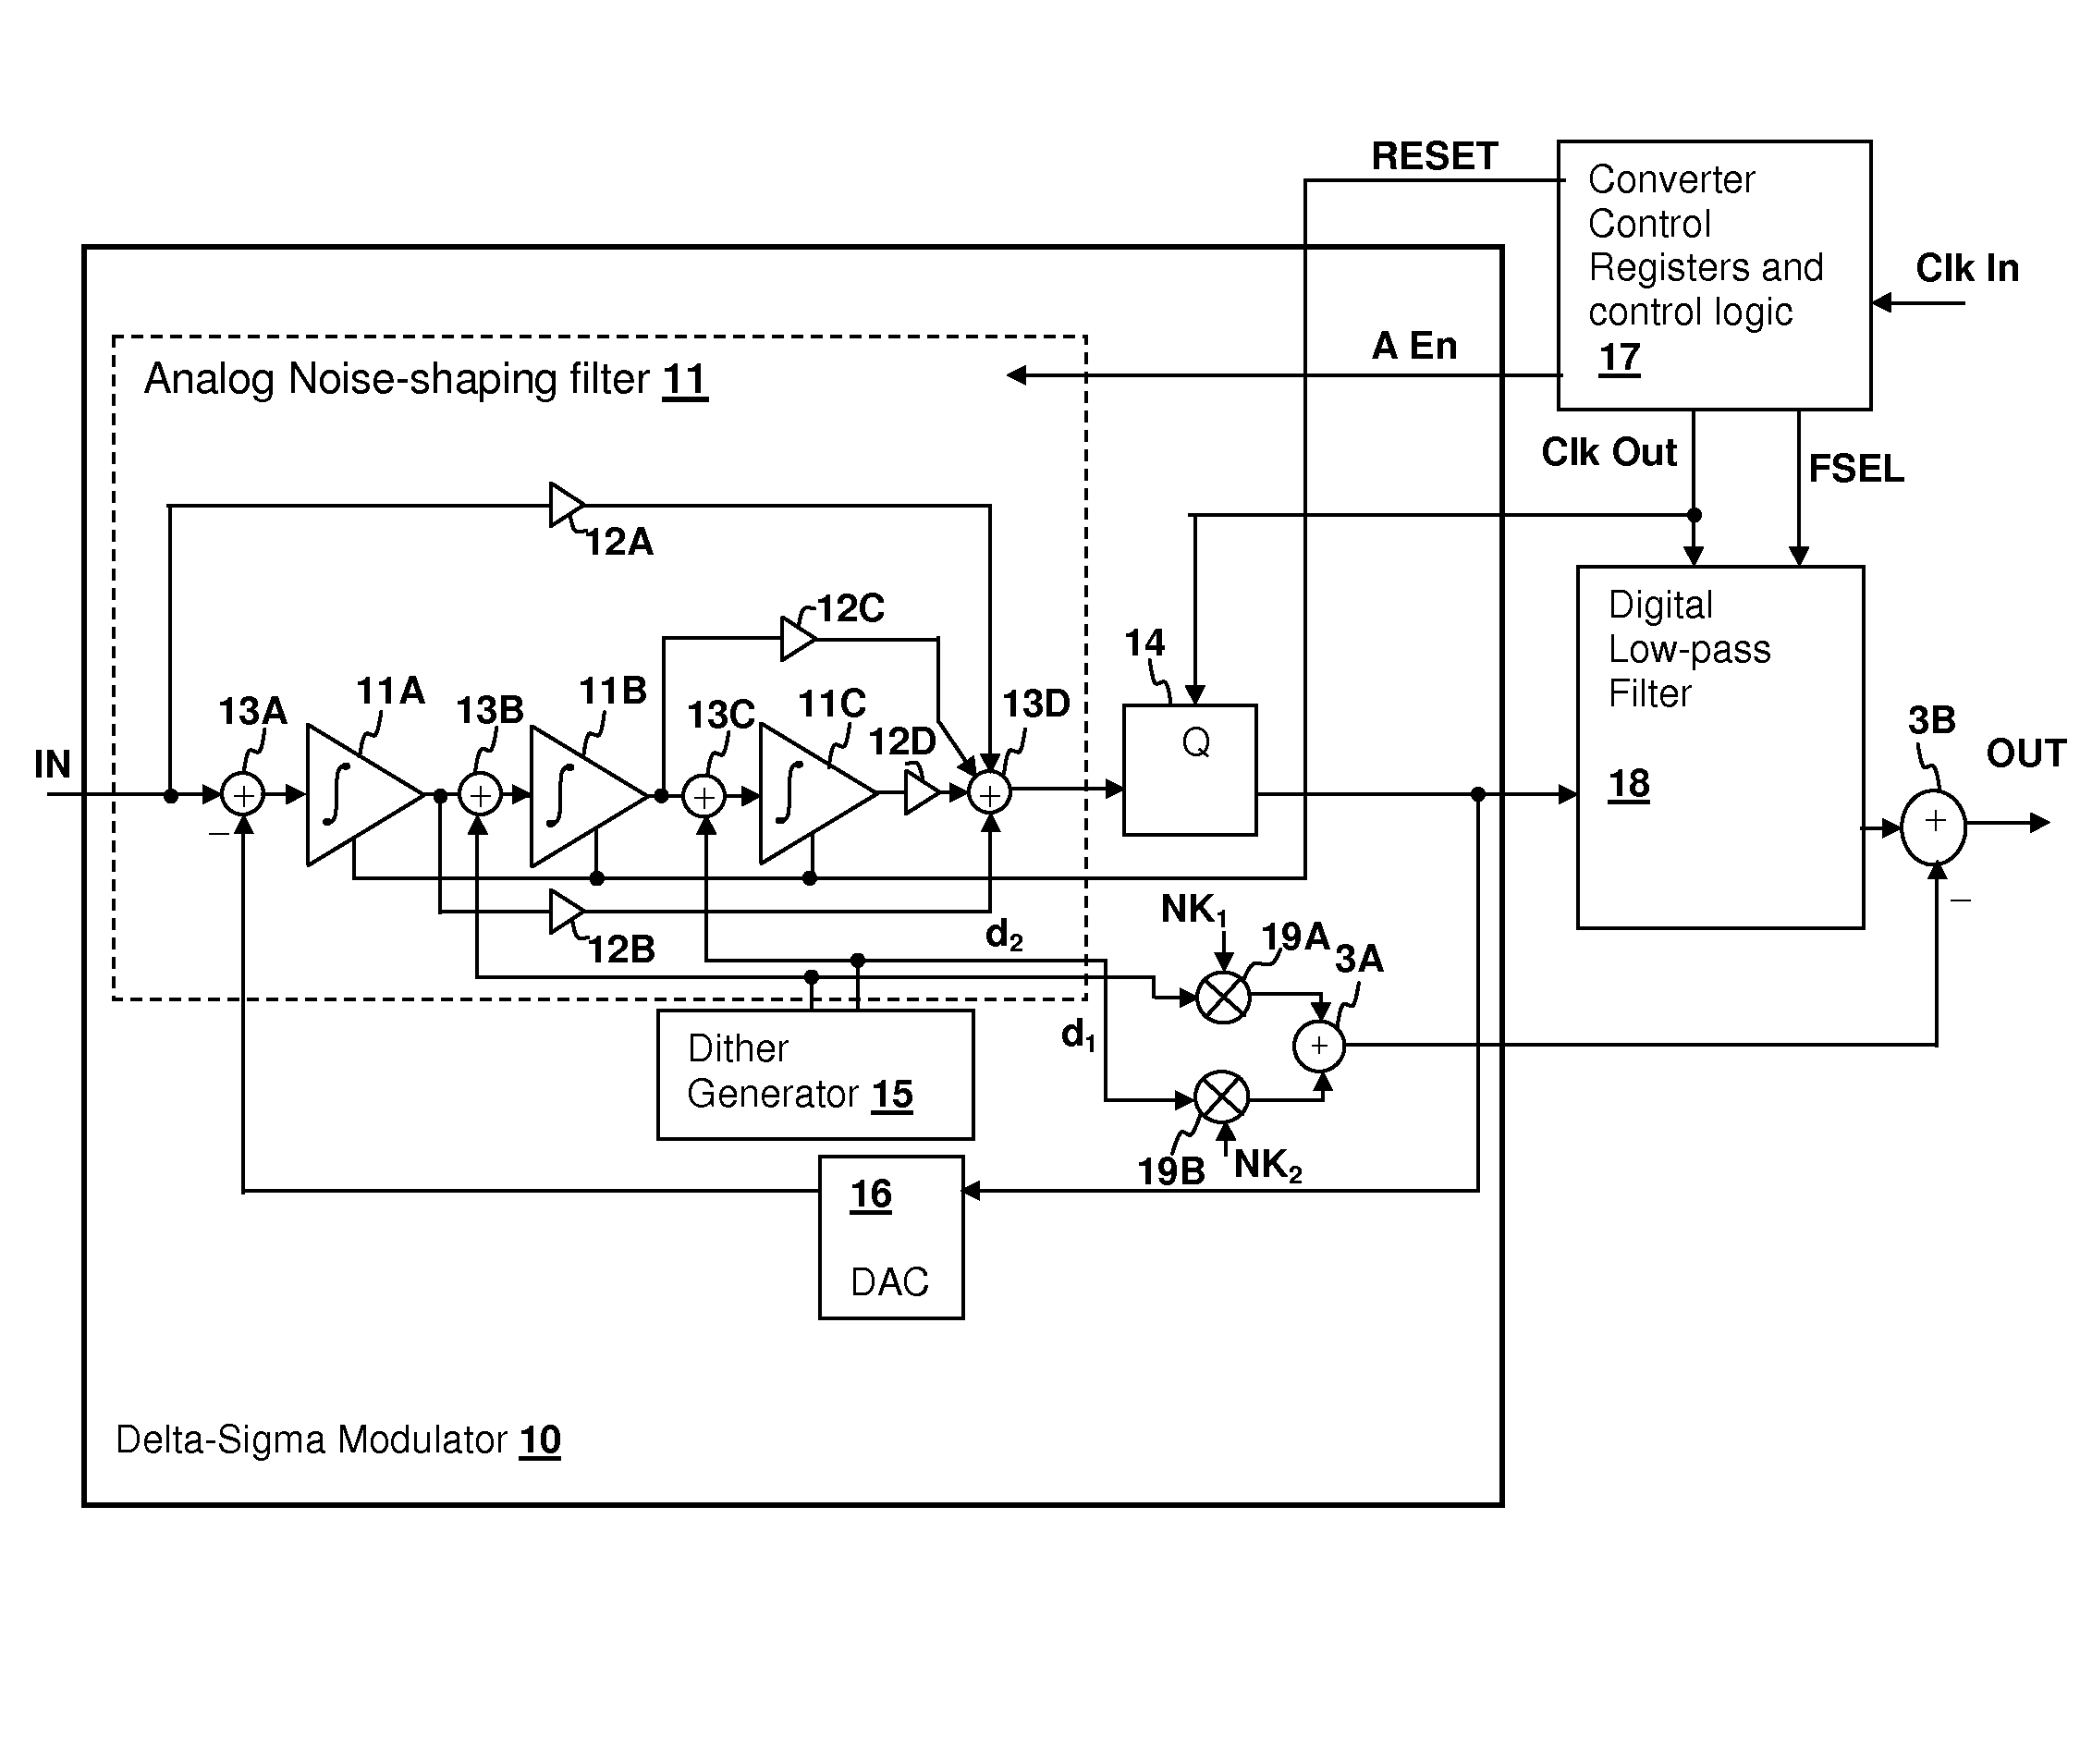 Analog-to-digital converter (ADC) having integrator dither injection and quantizer output compensation